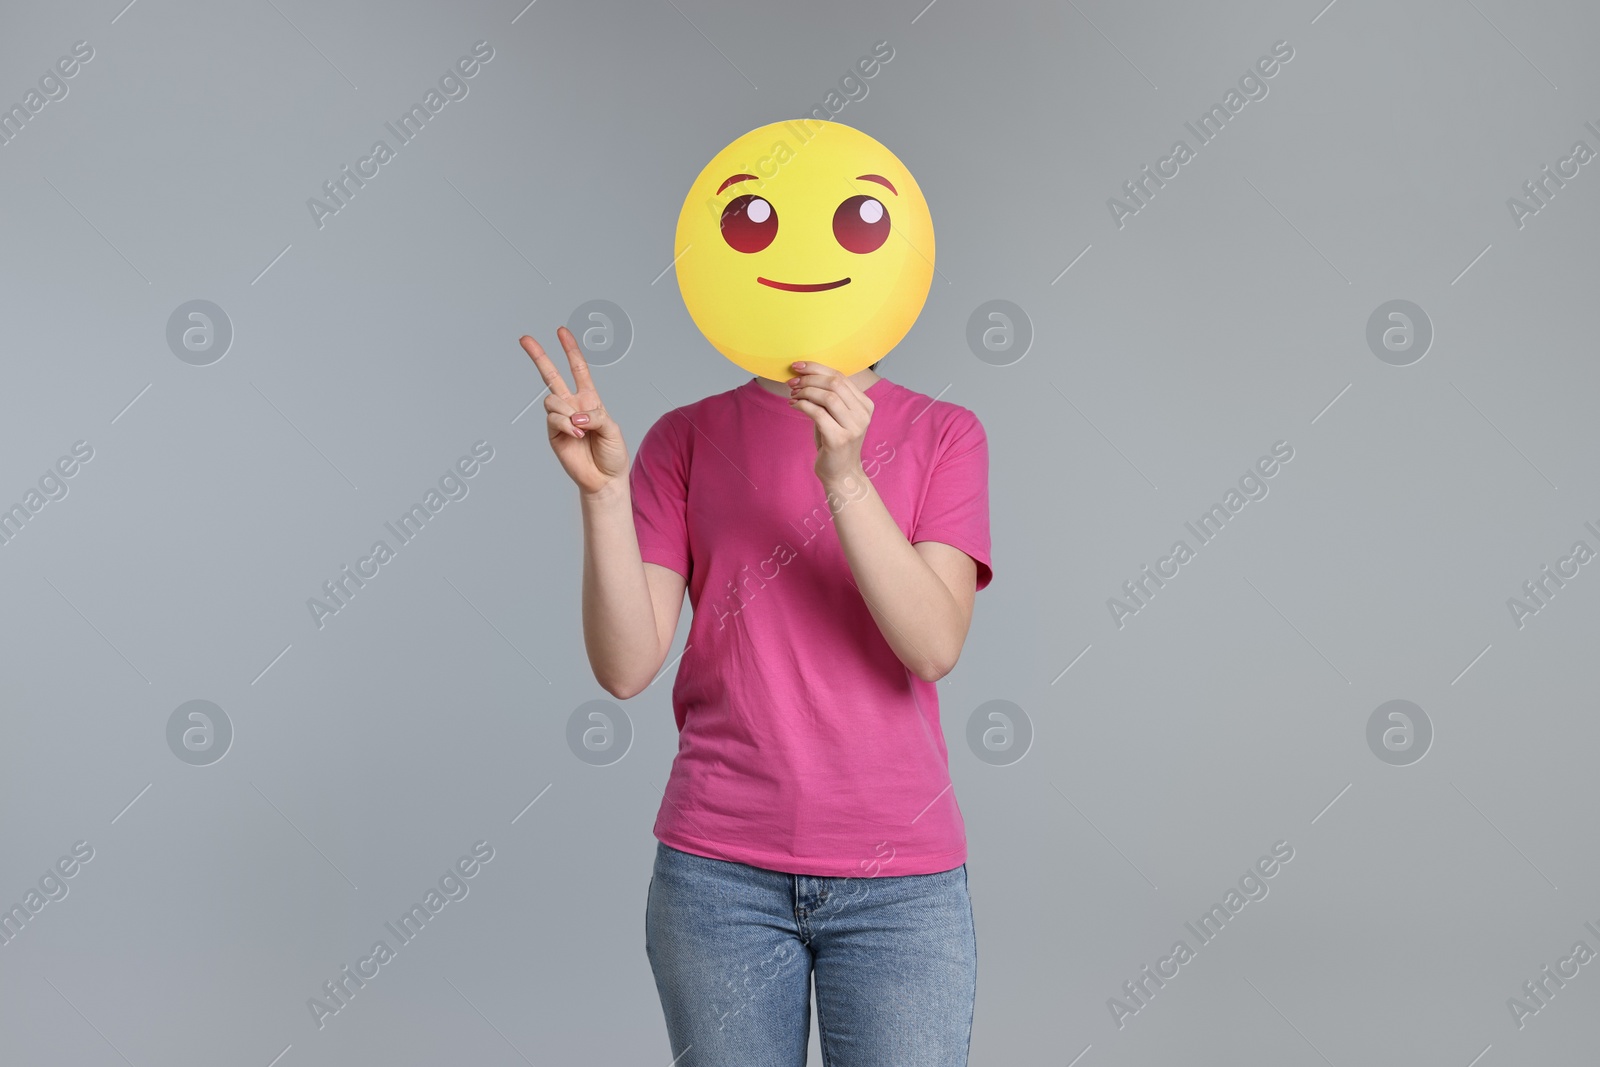 Photo of Woman covering face with smiling emoticon and showing peace sign on grey background